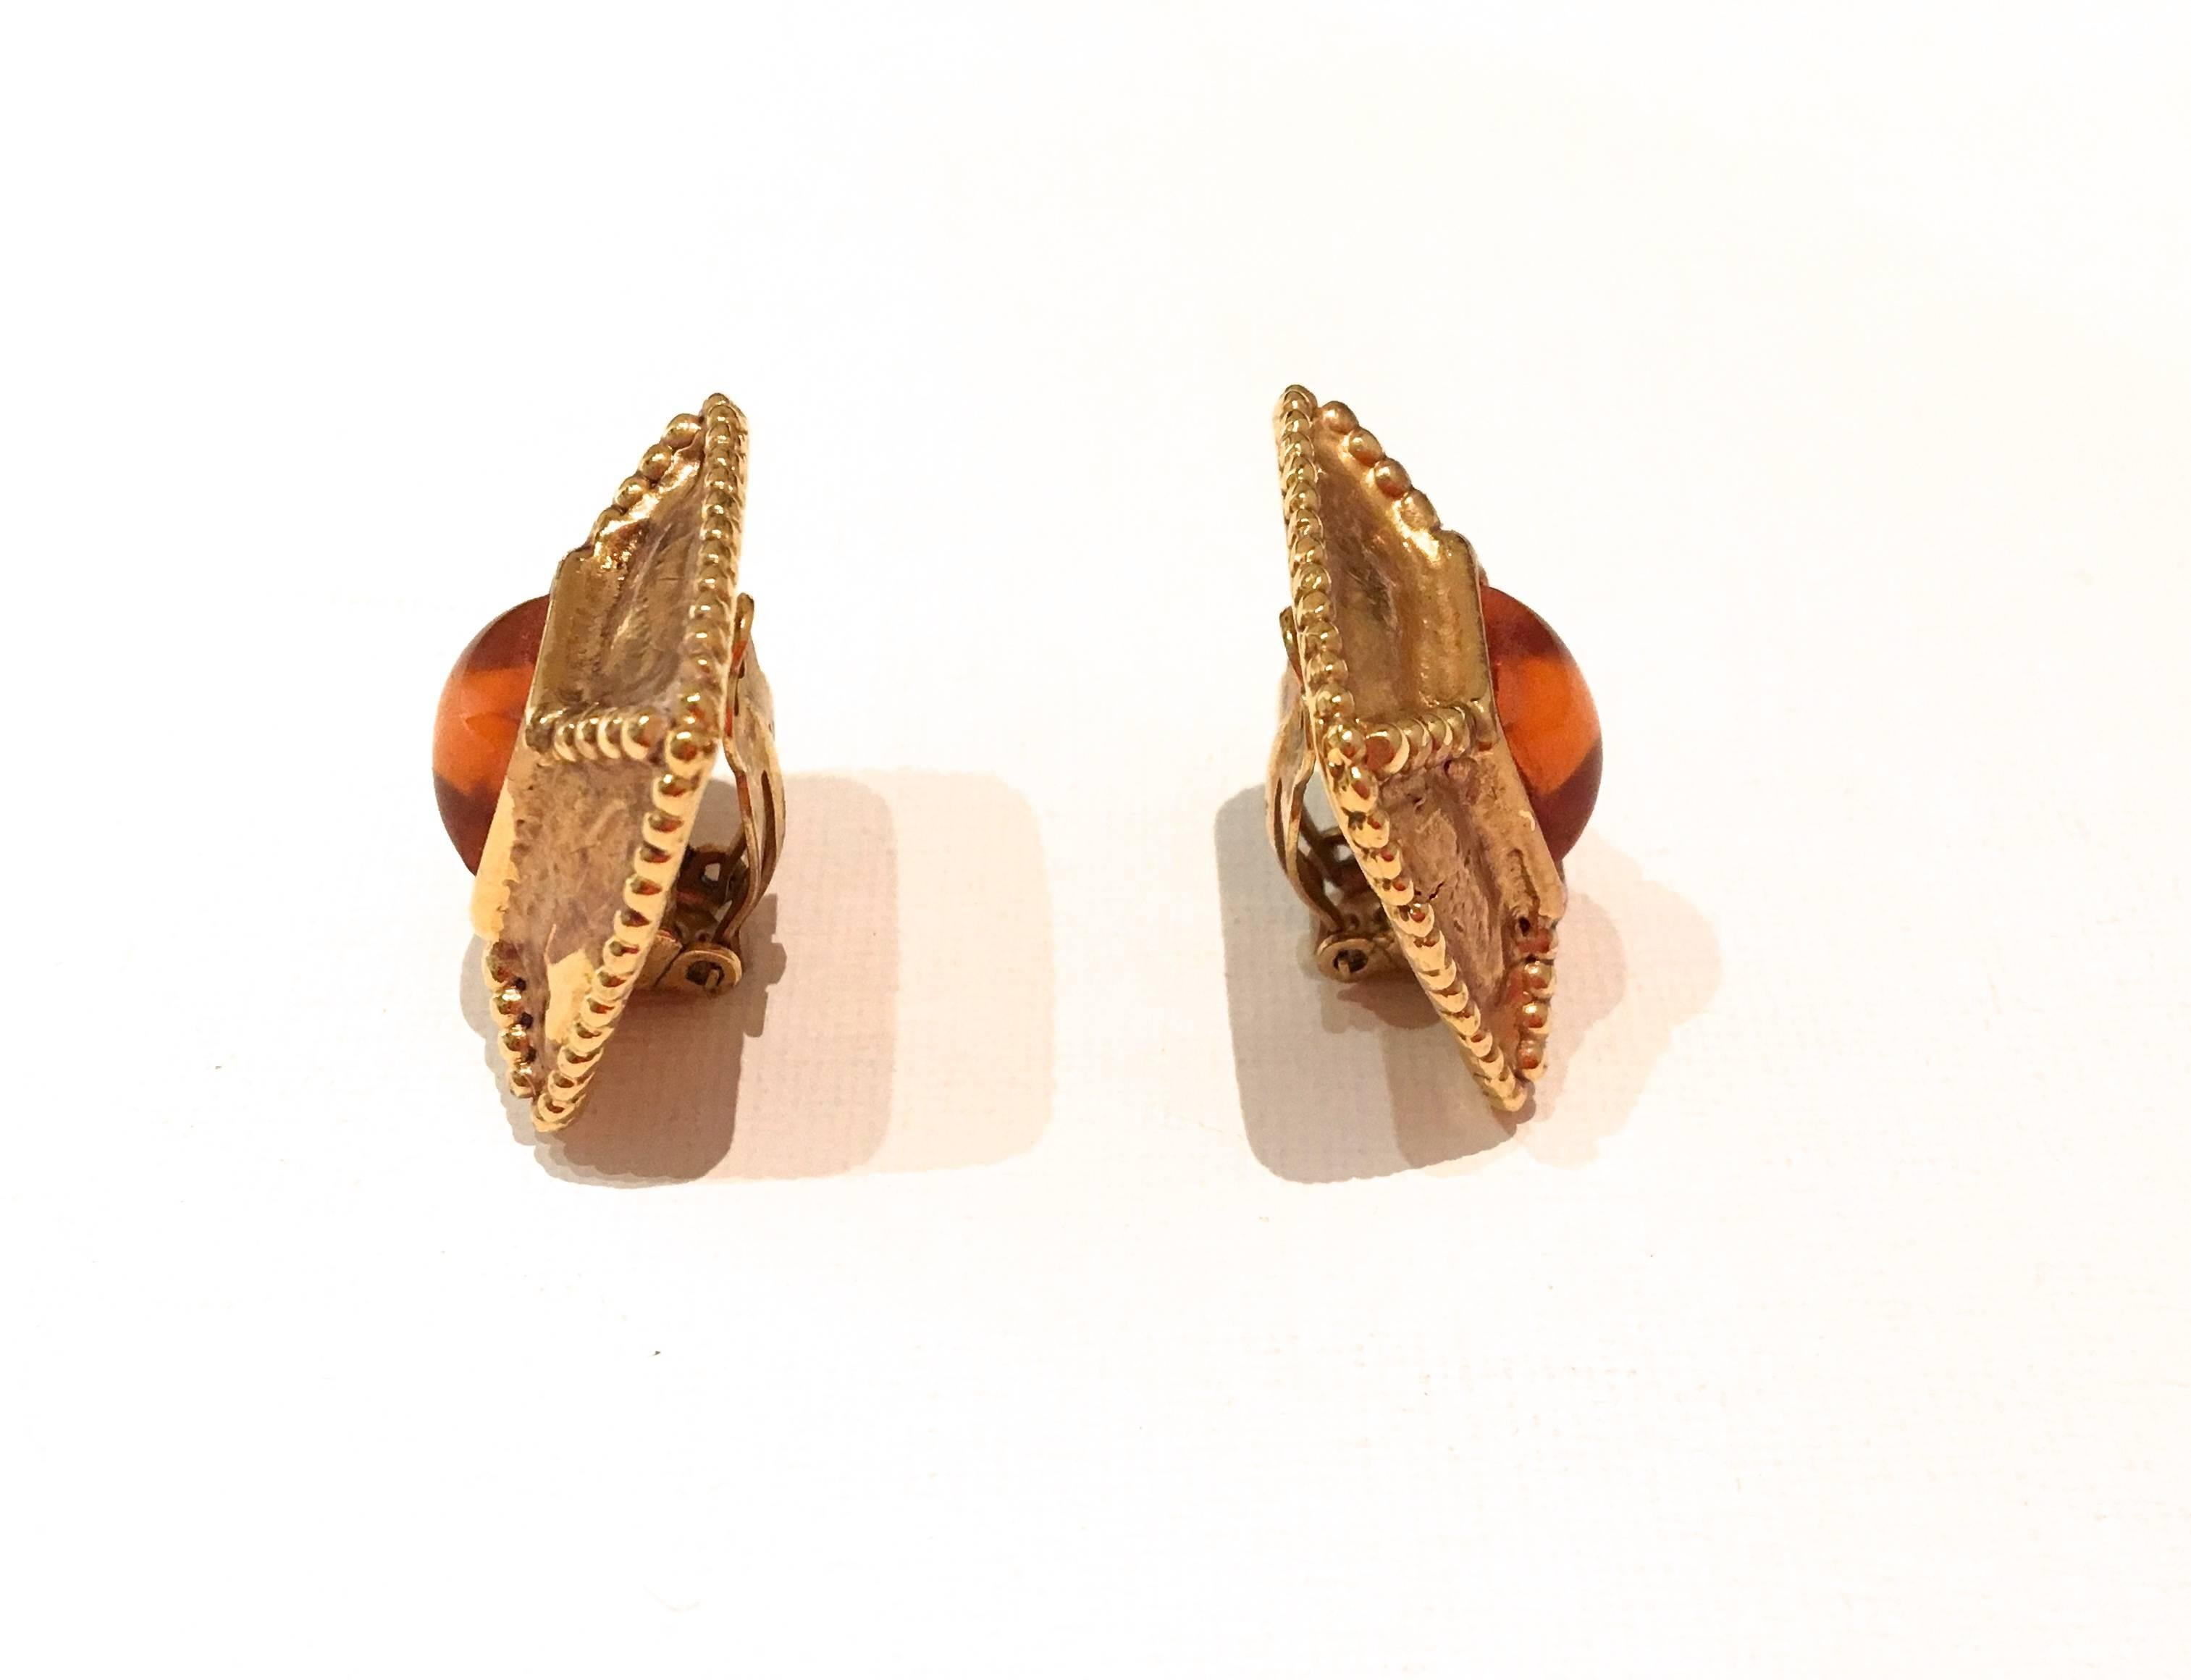 Vintage Yves Saint Laurent Earrings In Excellent Condition For Sale In Boca Raton, FL